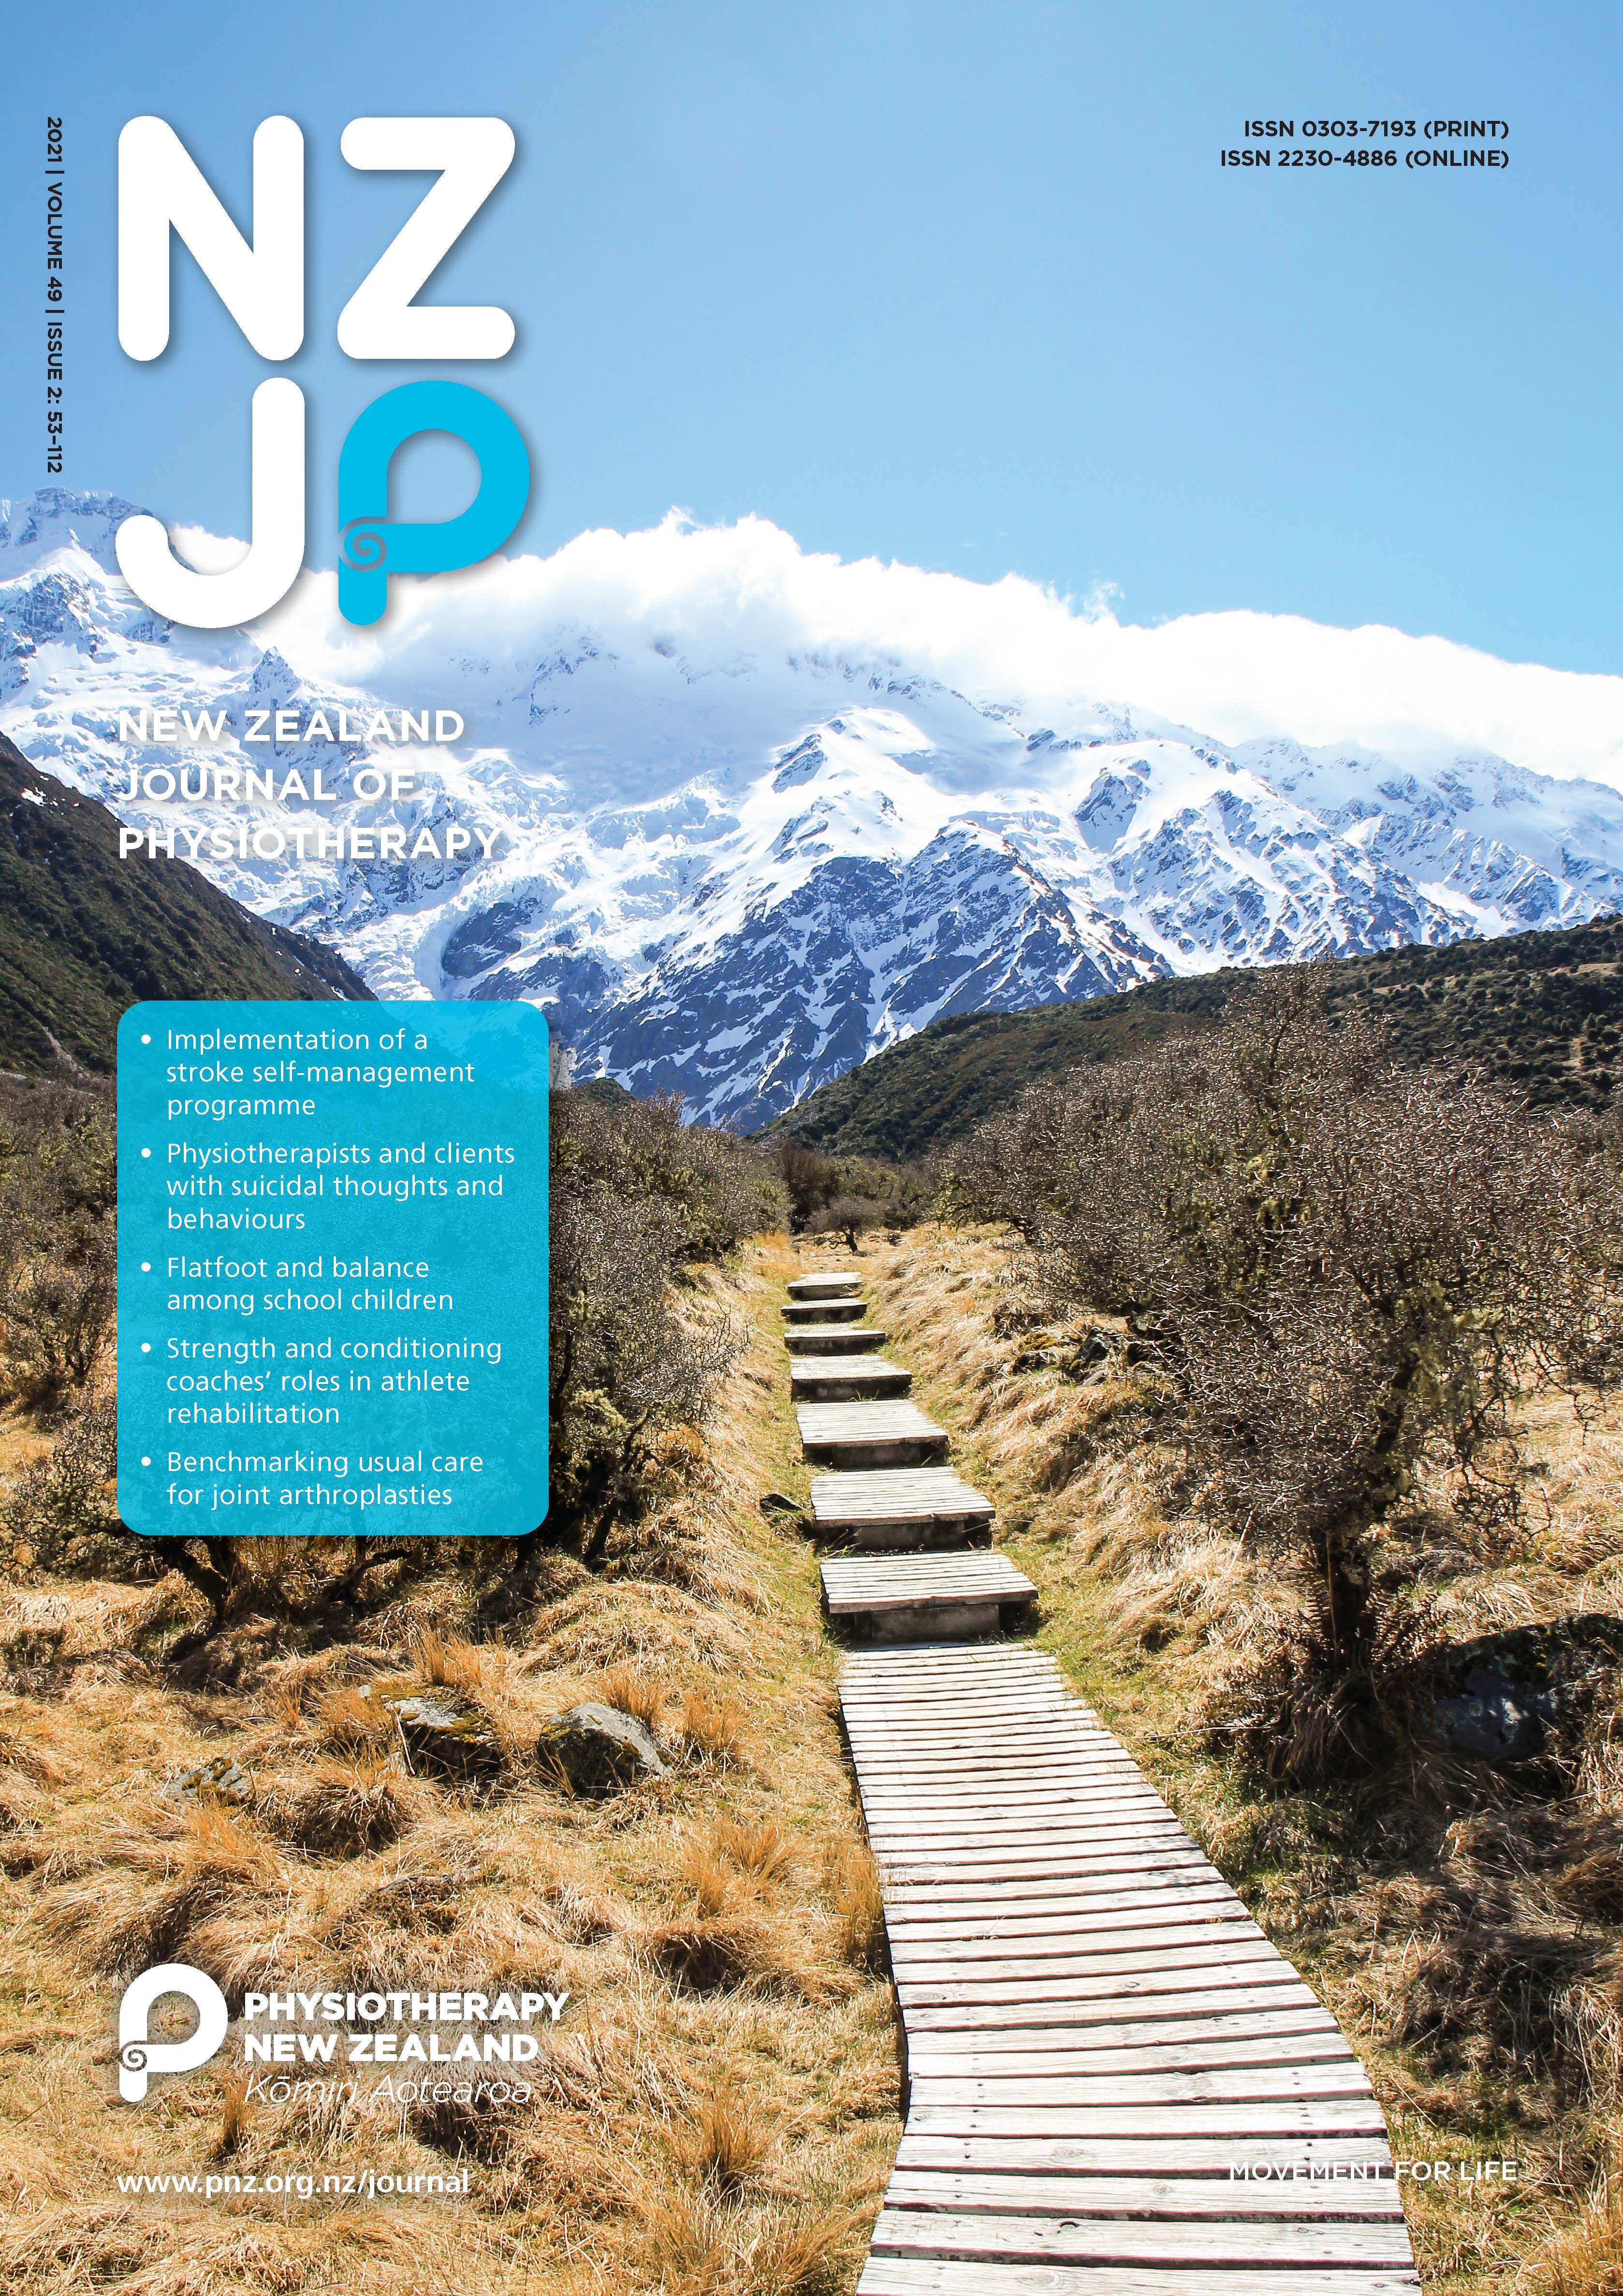 					View Vol. 49 No. 2 (2021): New Zealand Journal of Physiotherapy
				